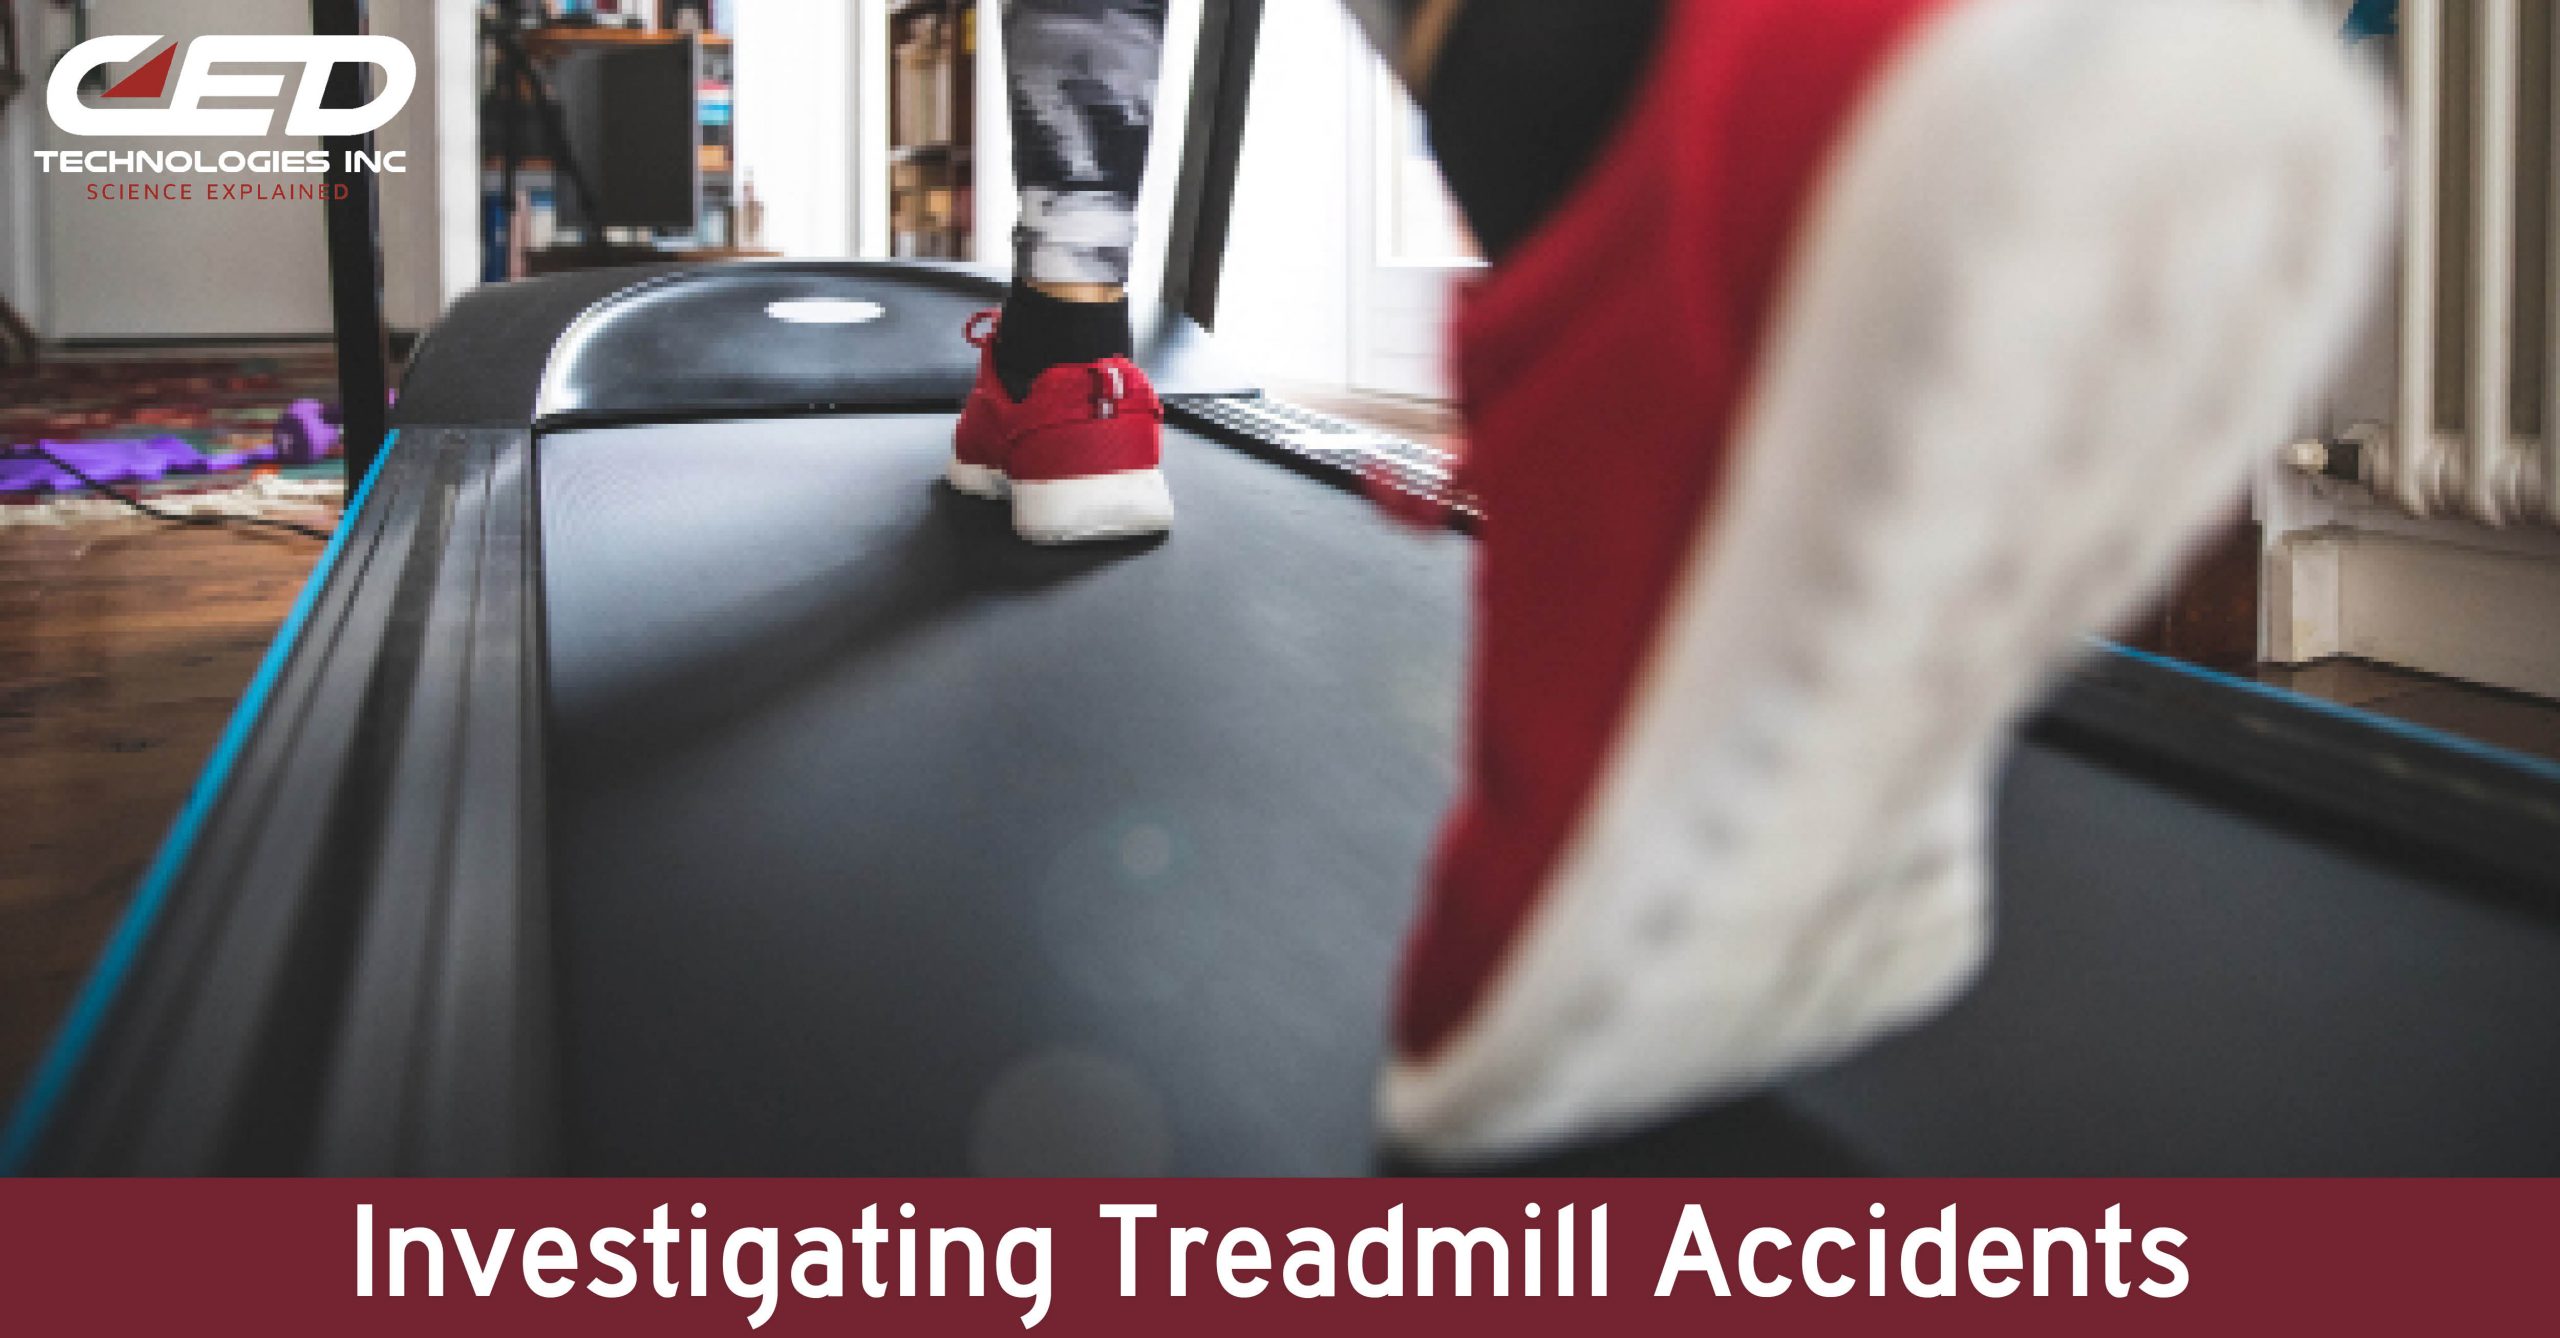 Investigating Treadmill Accidents and Claims of Product Defects